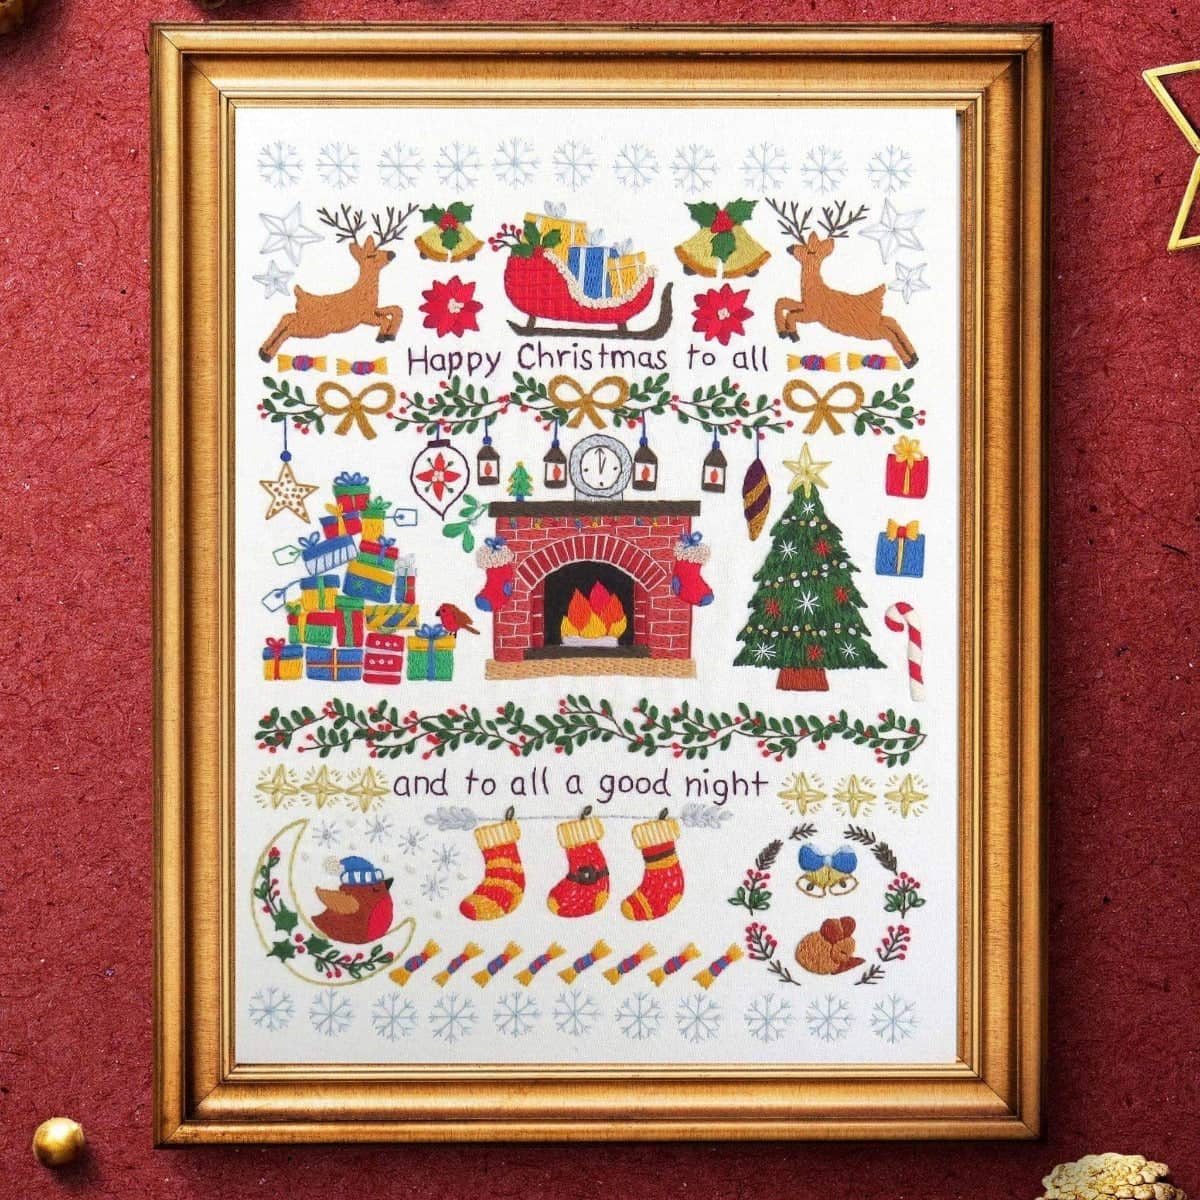 Night Before Christmas Hand Embroidery Kit , Embroidery Kit , StitchDoodles , christmas, embroidery hoop kit, embroidery kit for adults, embroidery kit for beginers, embroidery kits for beginners, hand embroidery , StitchDoodles , shop.stitchdoodles.com